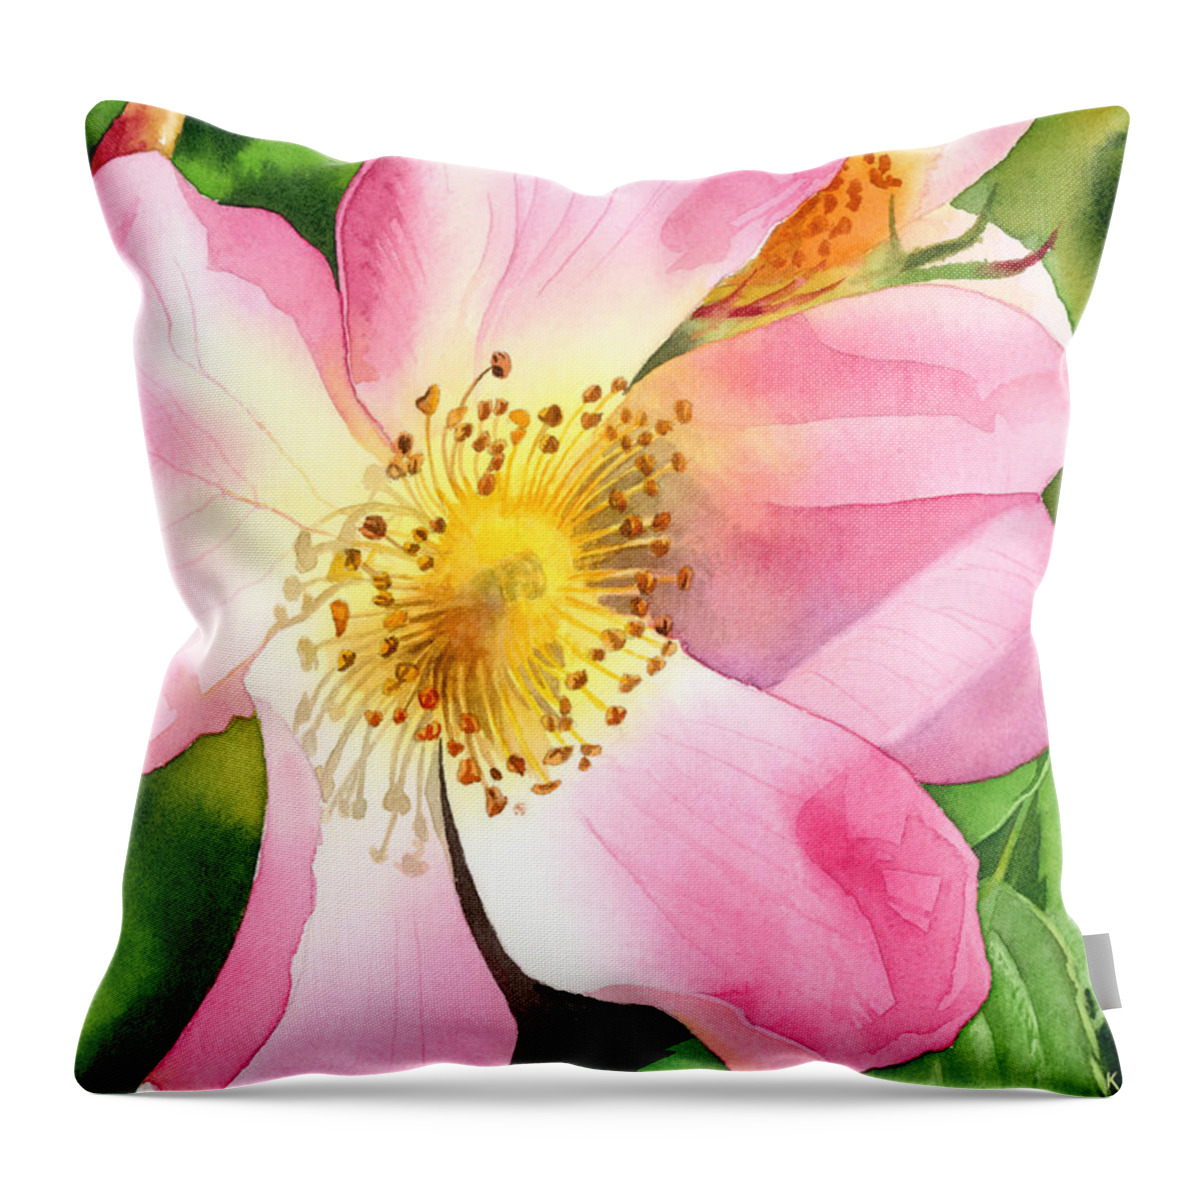 Rose Throw Pillow featuring the painting Dog Rose by Espero Art